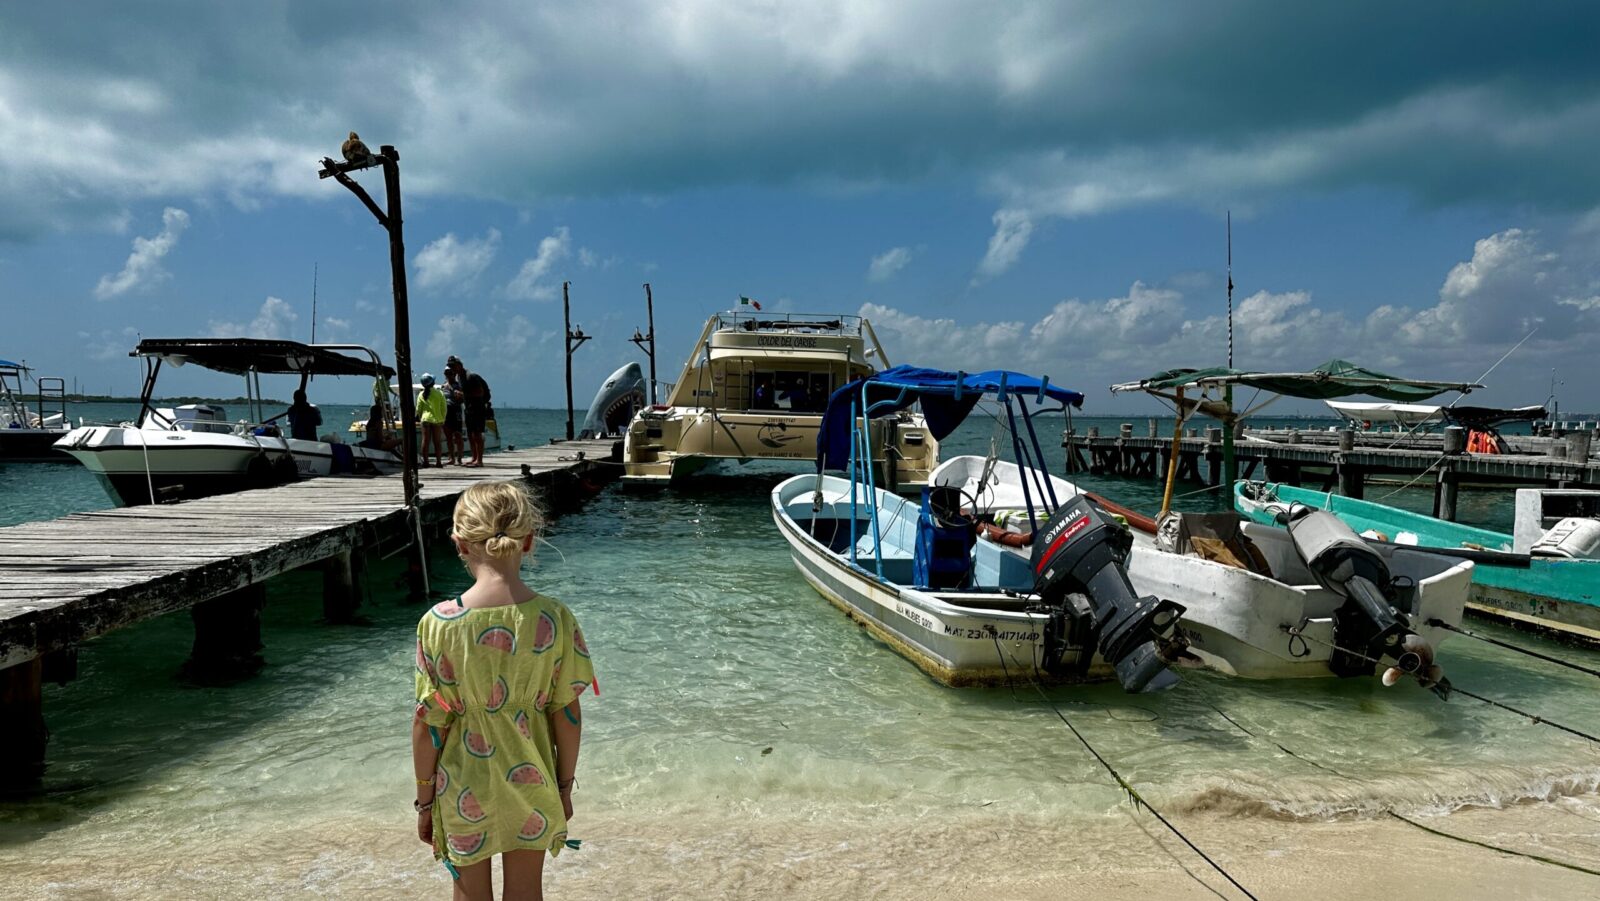 child looking out at boats and dock on Ilsa Mujeres, Mexico